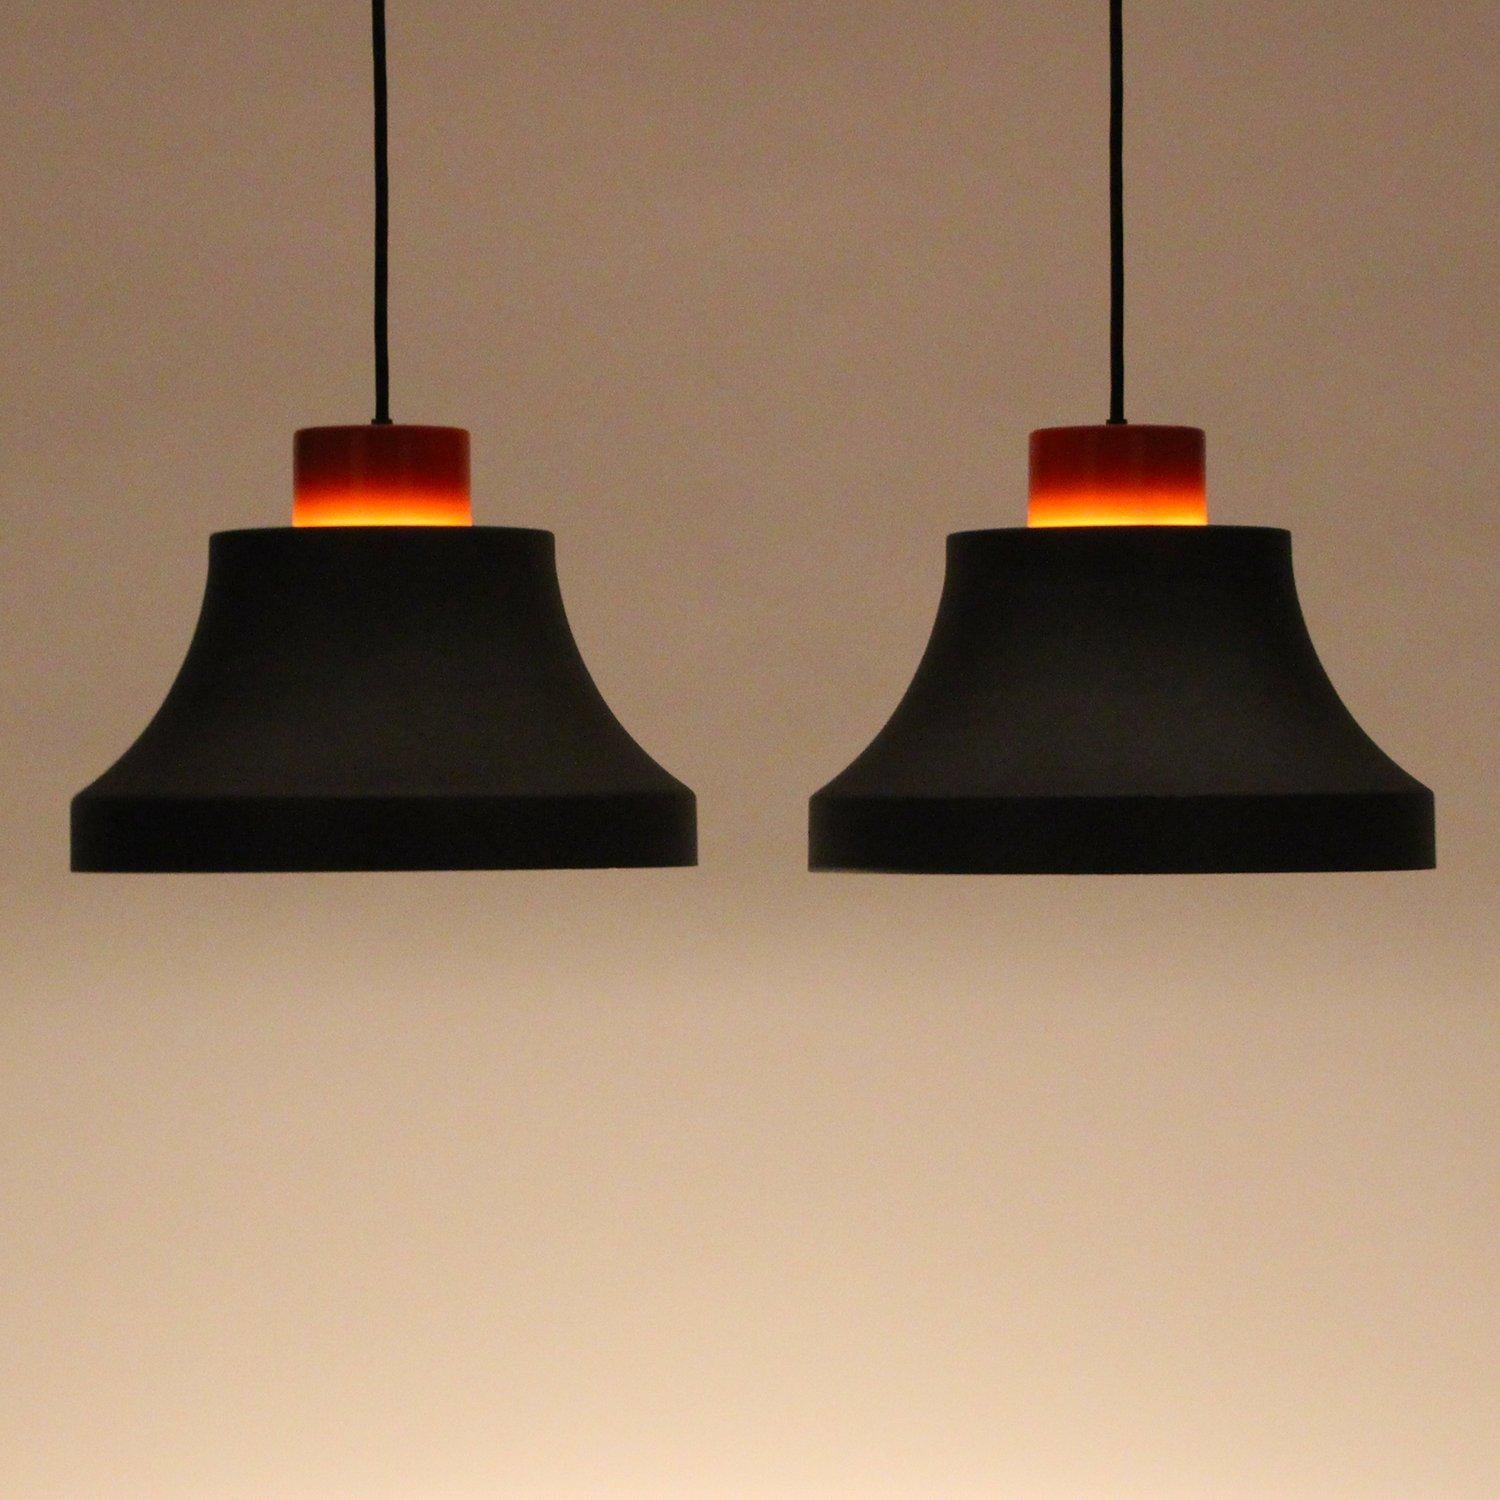 Askepot (Cinderella) - pendant pair by Jo Hammerborg for Fog & Mørup in 1976-1977 - beautiful pair of Industrial-style hanging lamps, unusual Hammerborg design.

The bell-shaped Askepot is quite an unusual Hammerborg design without any of his